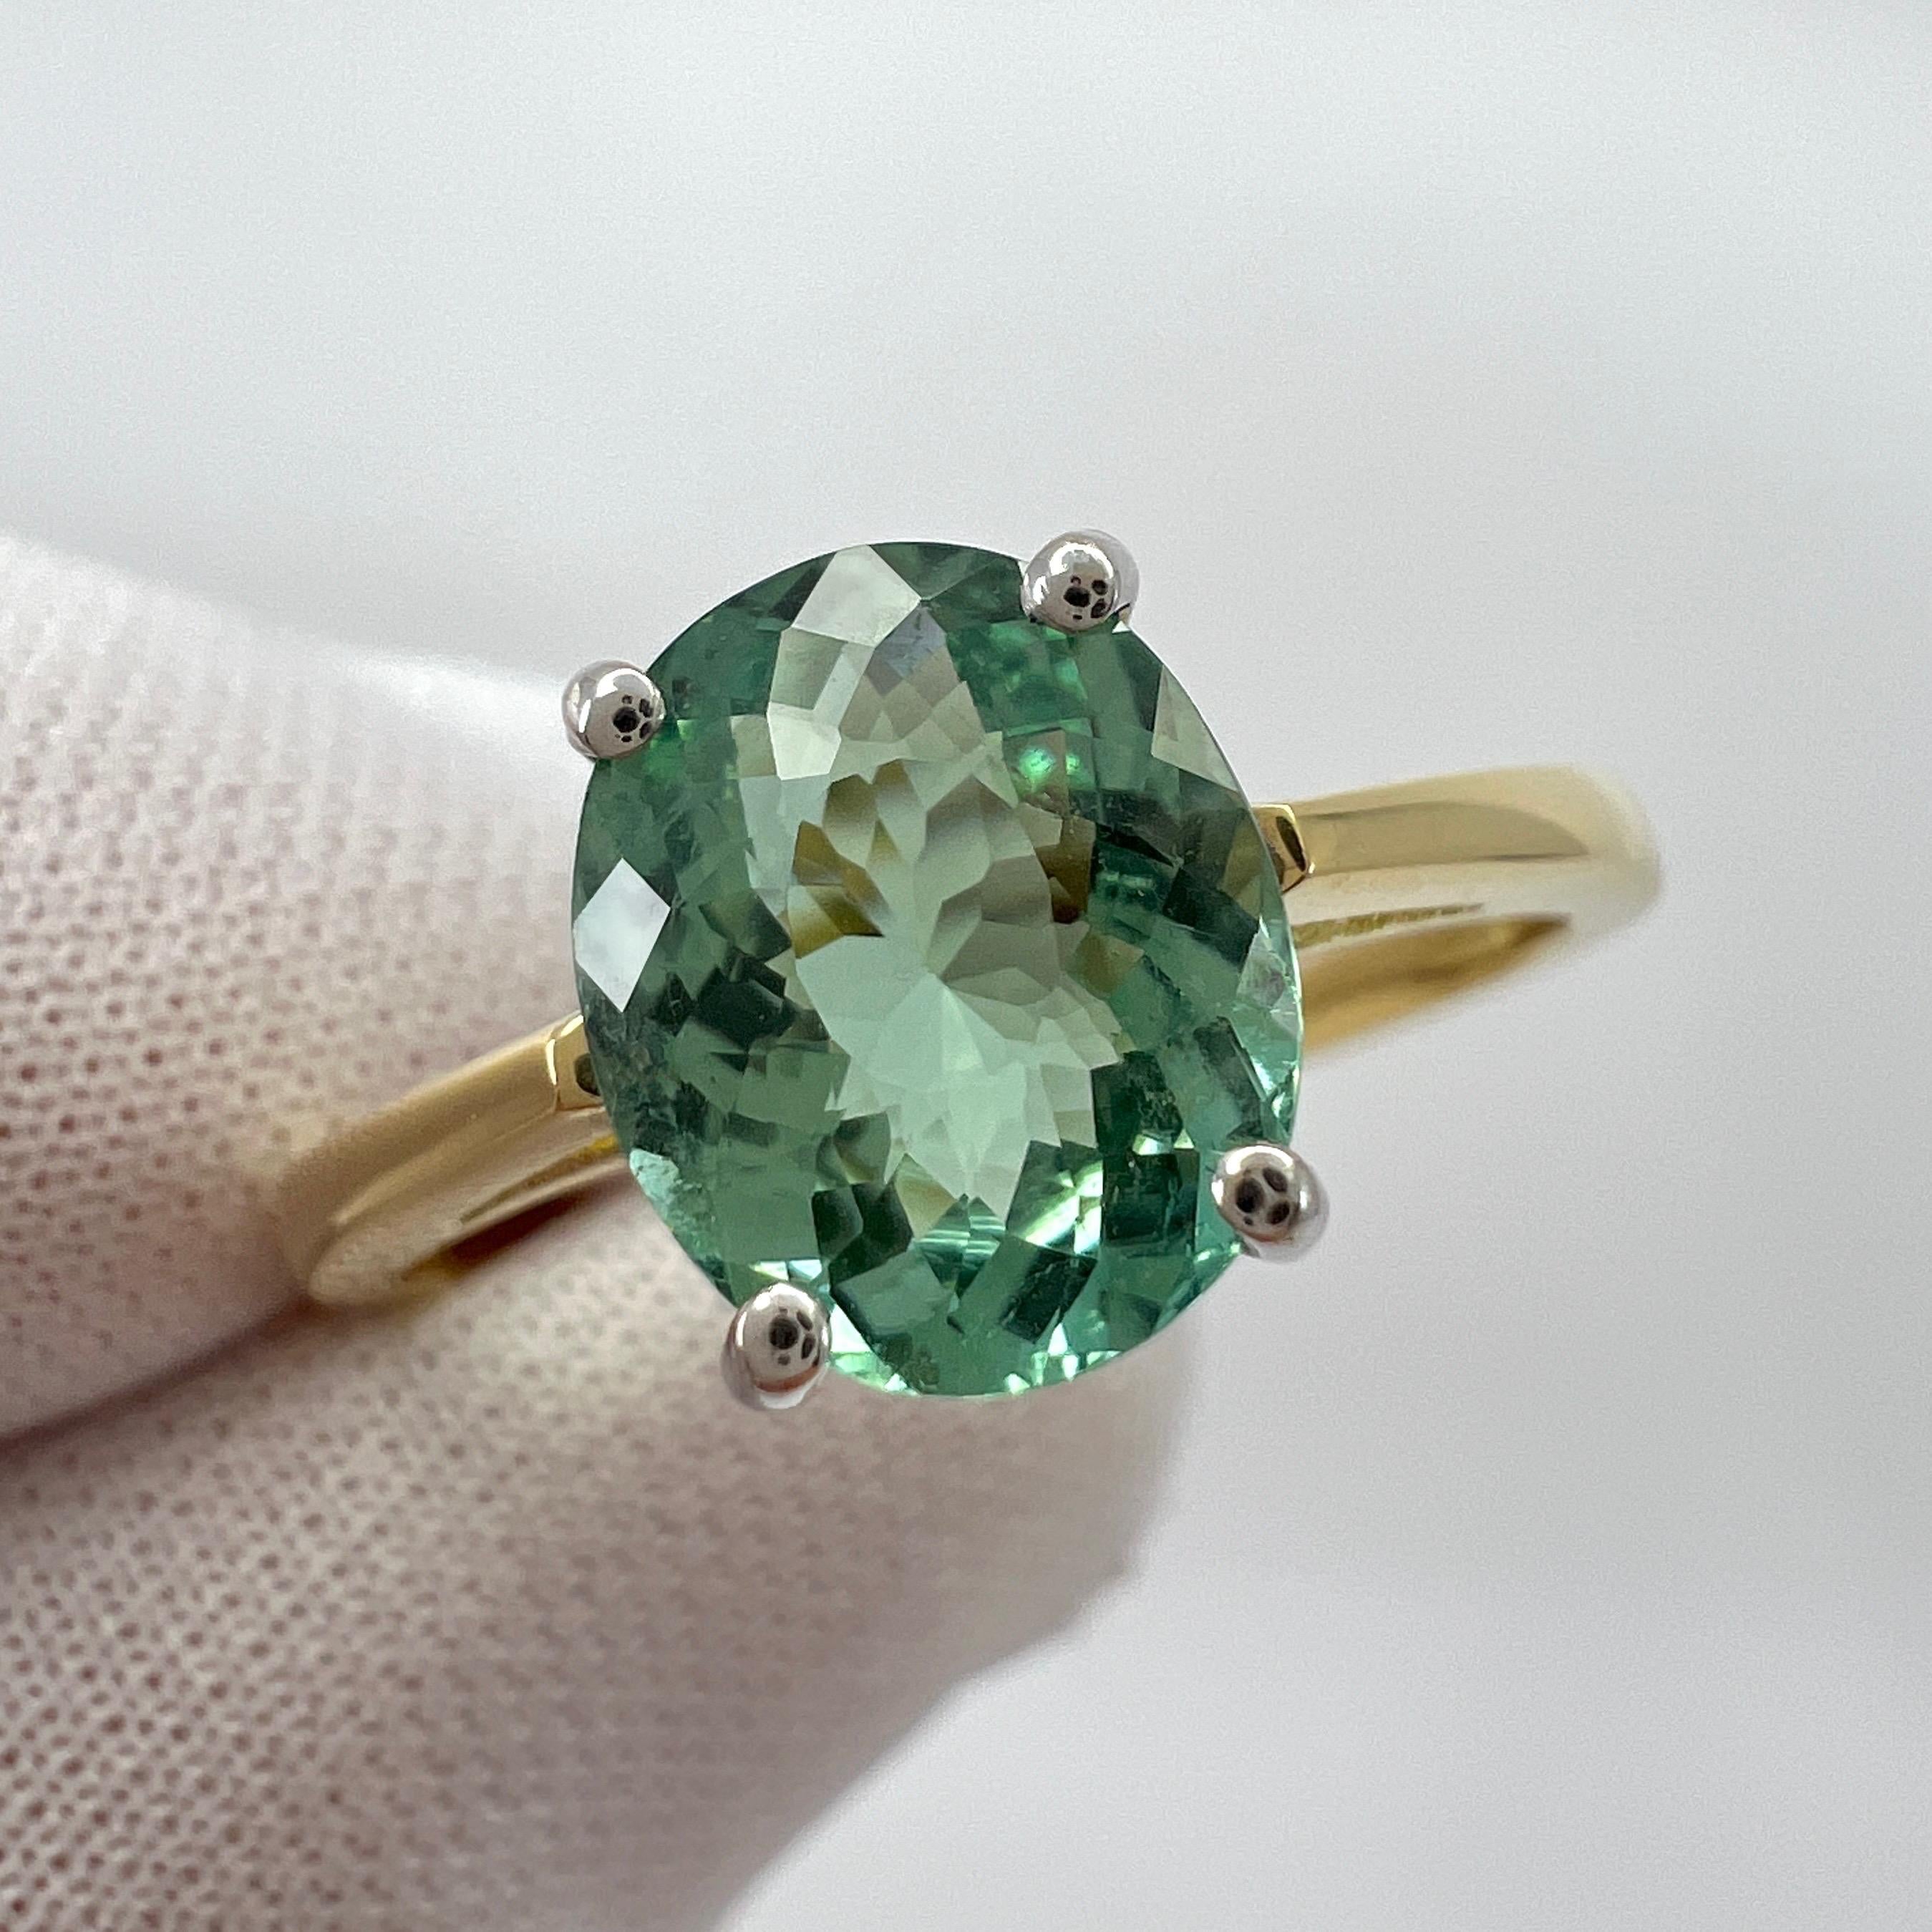 1.75ct Vivid Blue Green Tourmaline Oval Cut 18k Yellow White Gold Solitaire Ring For Sale 2